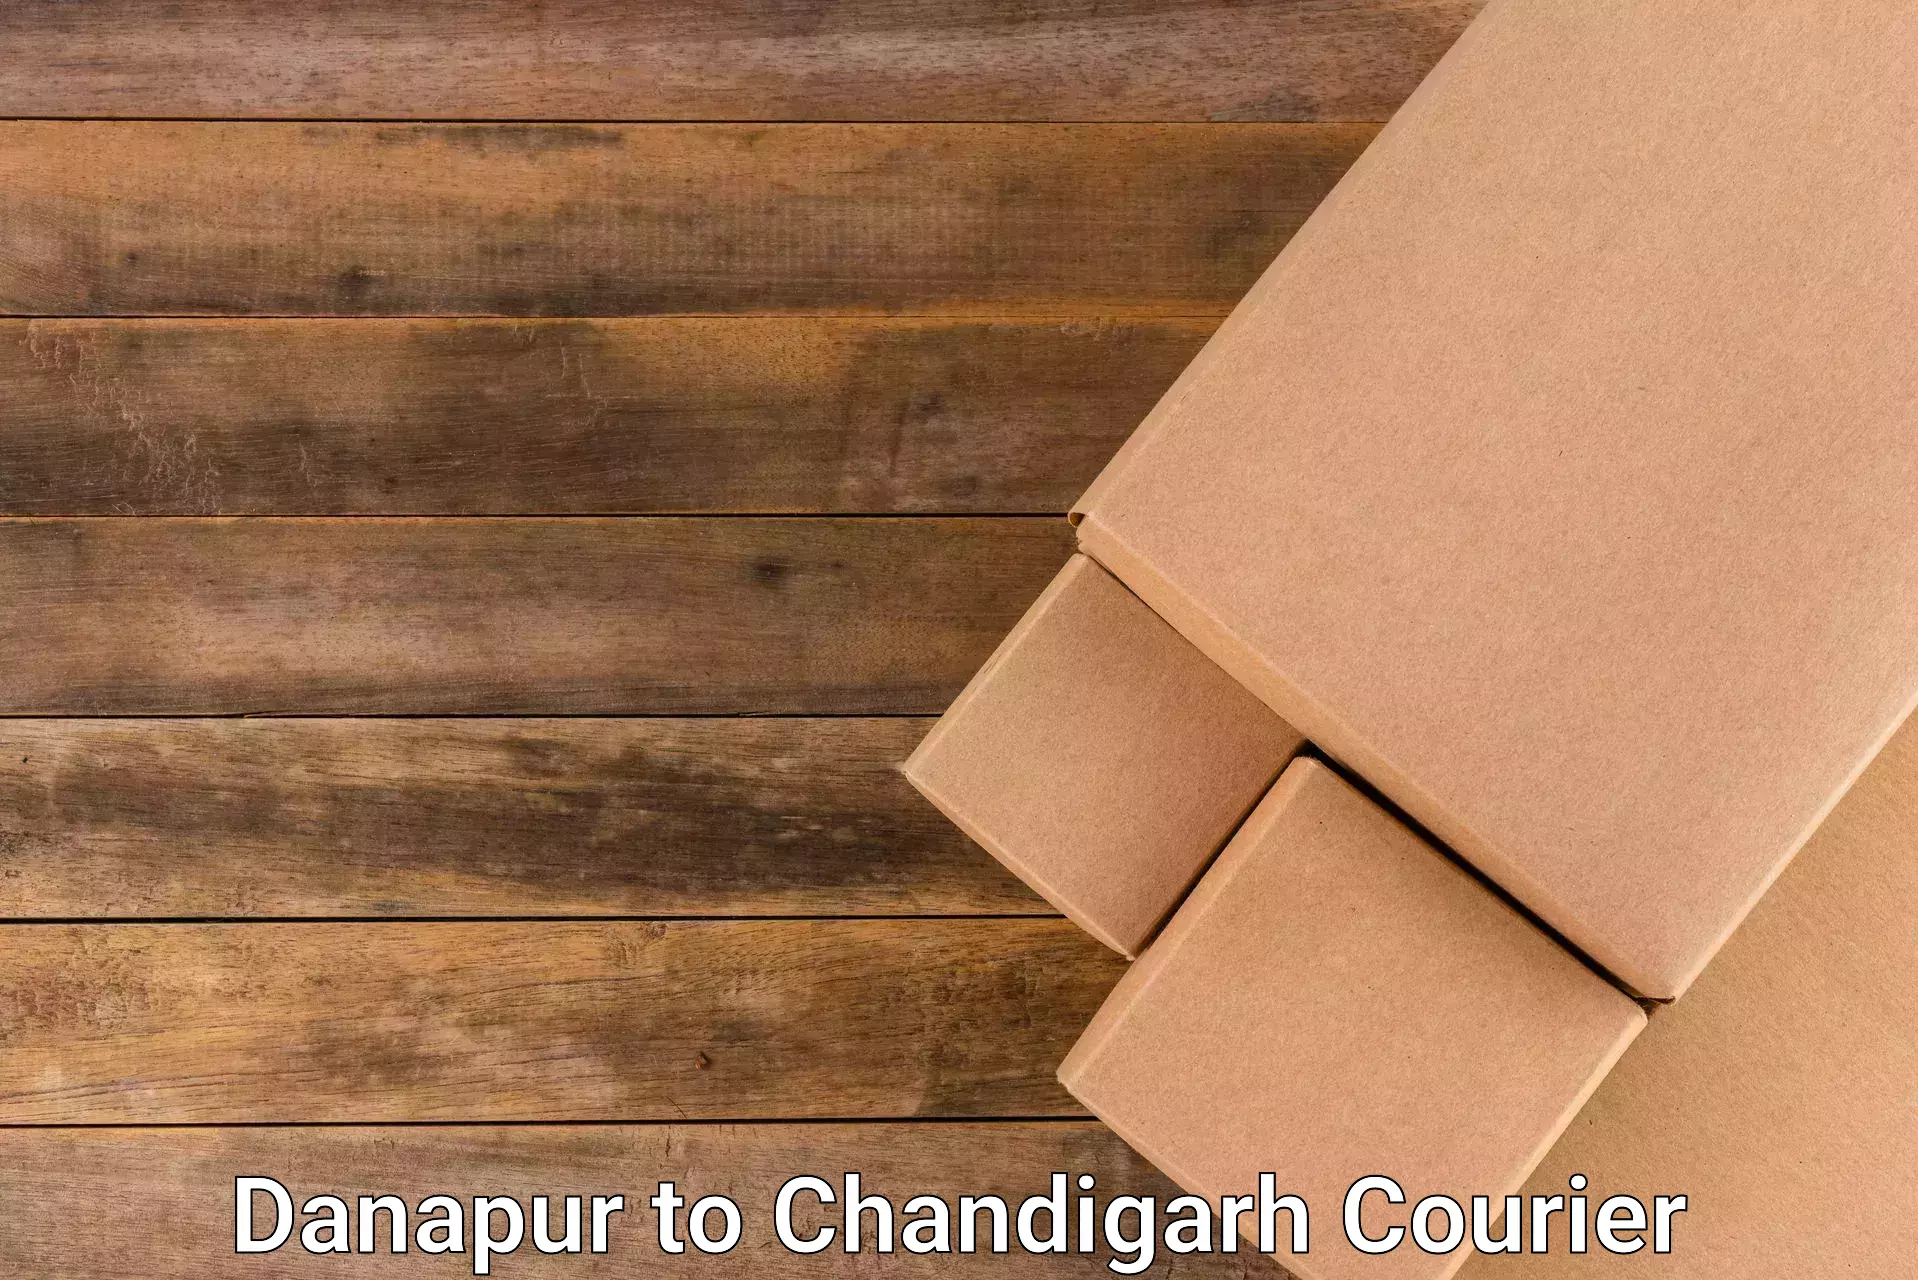 Nationwide parcel services Danapur to Chandigarh